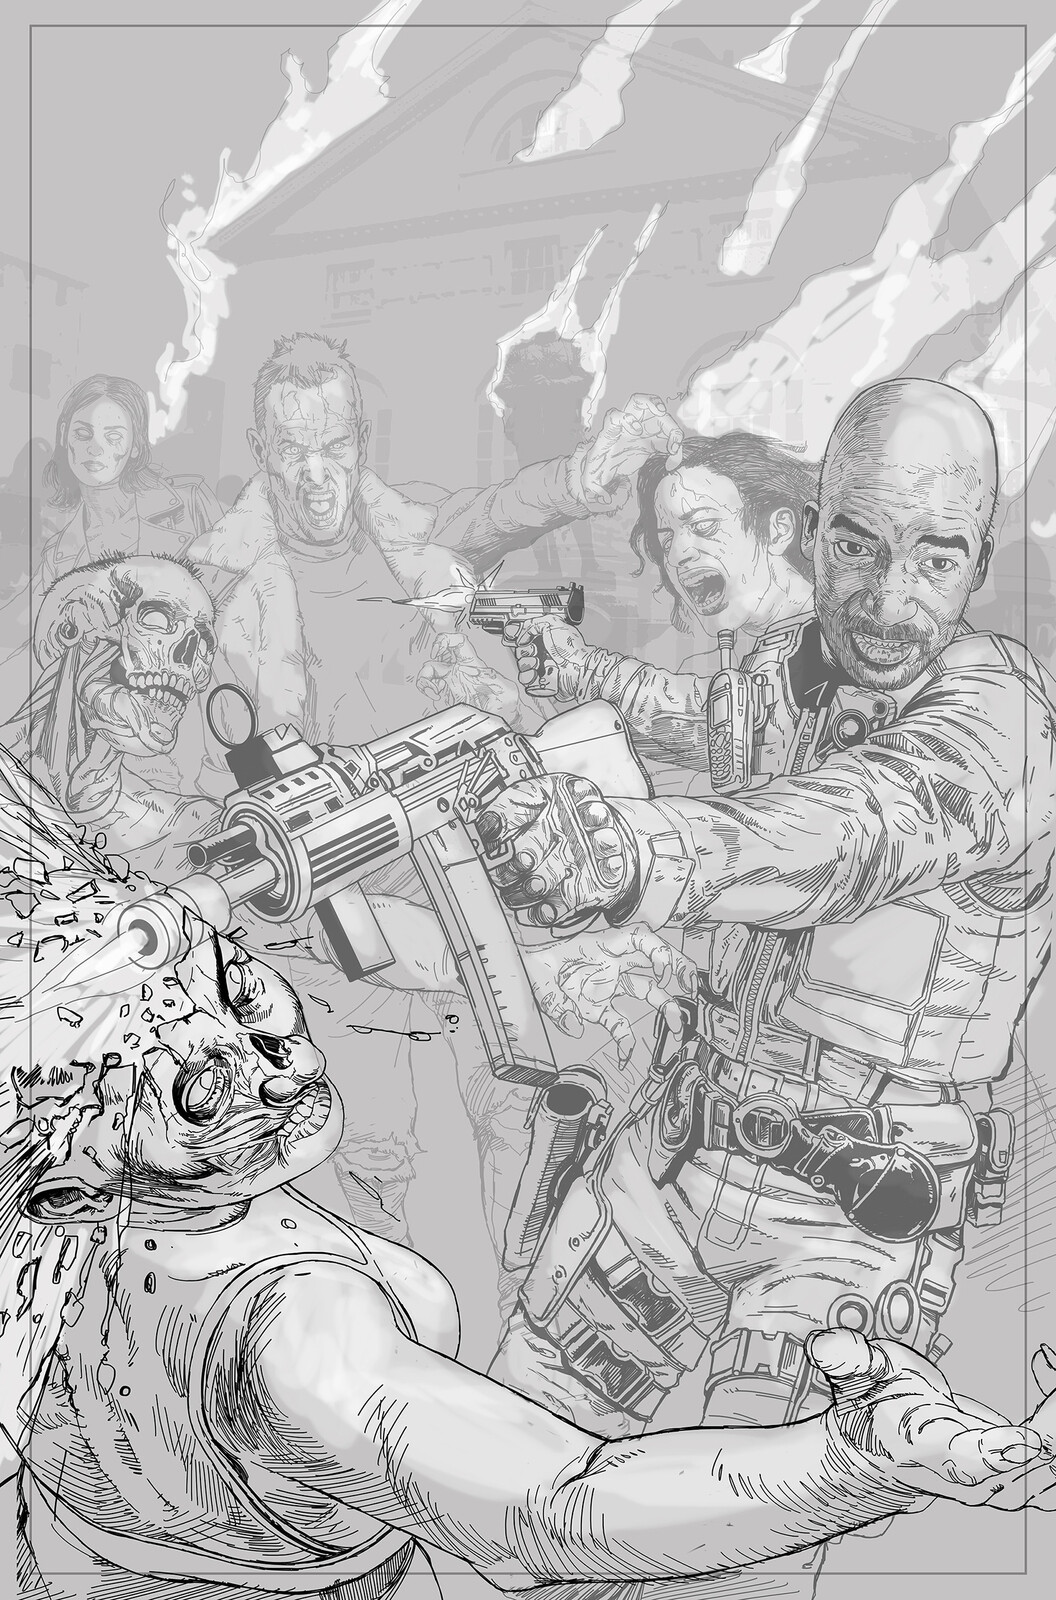 Edge Of Extinction Cover Sketch